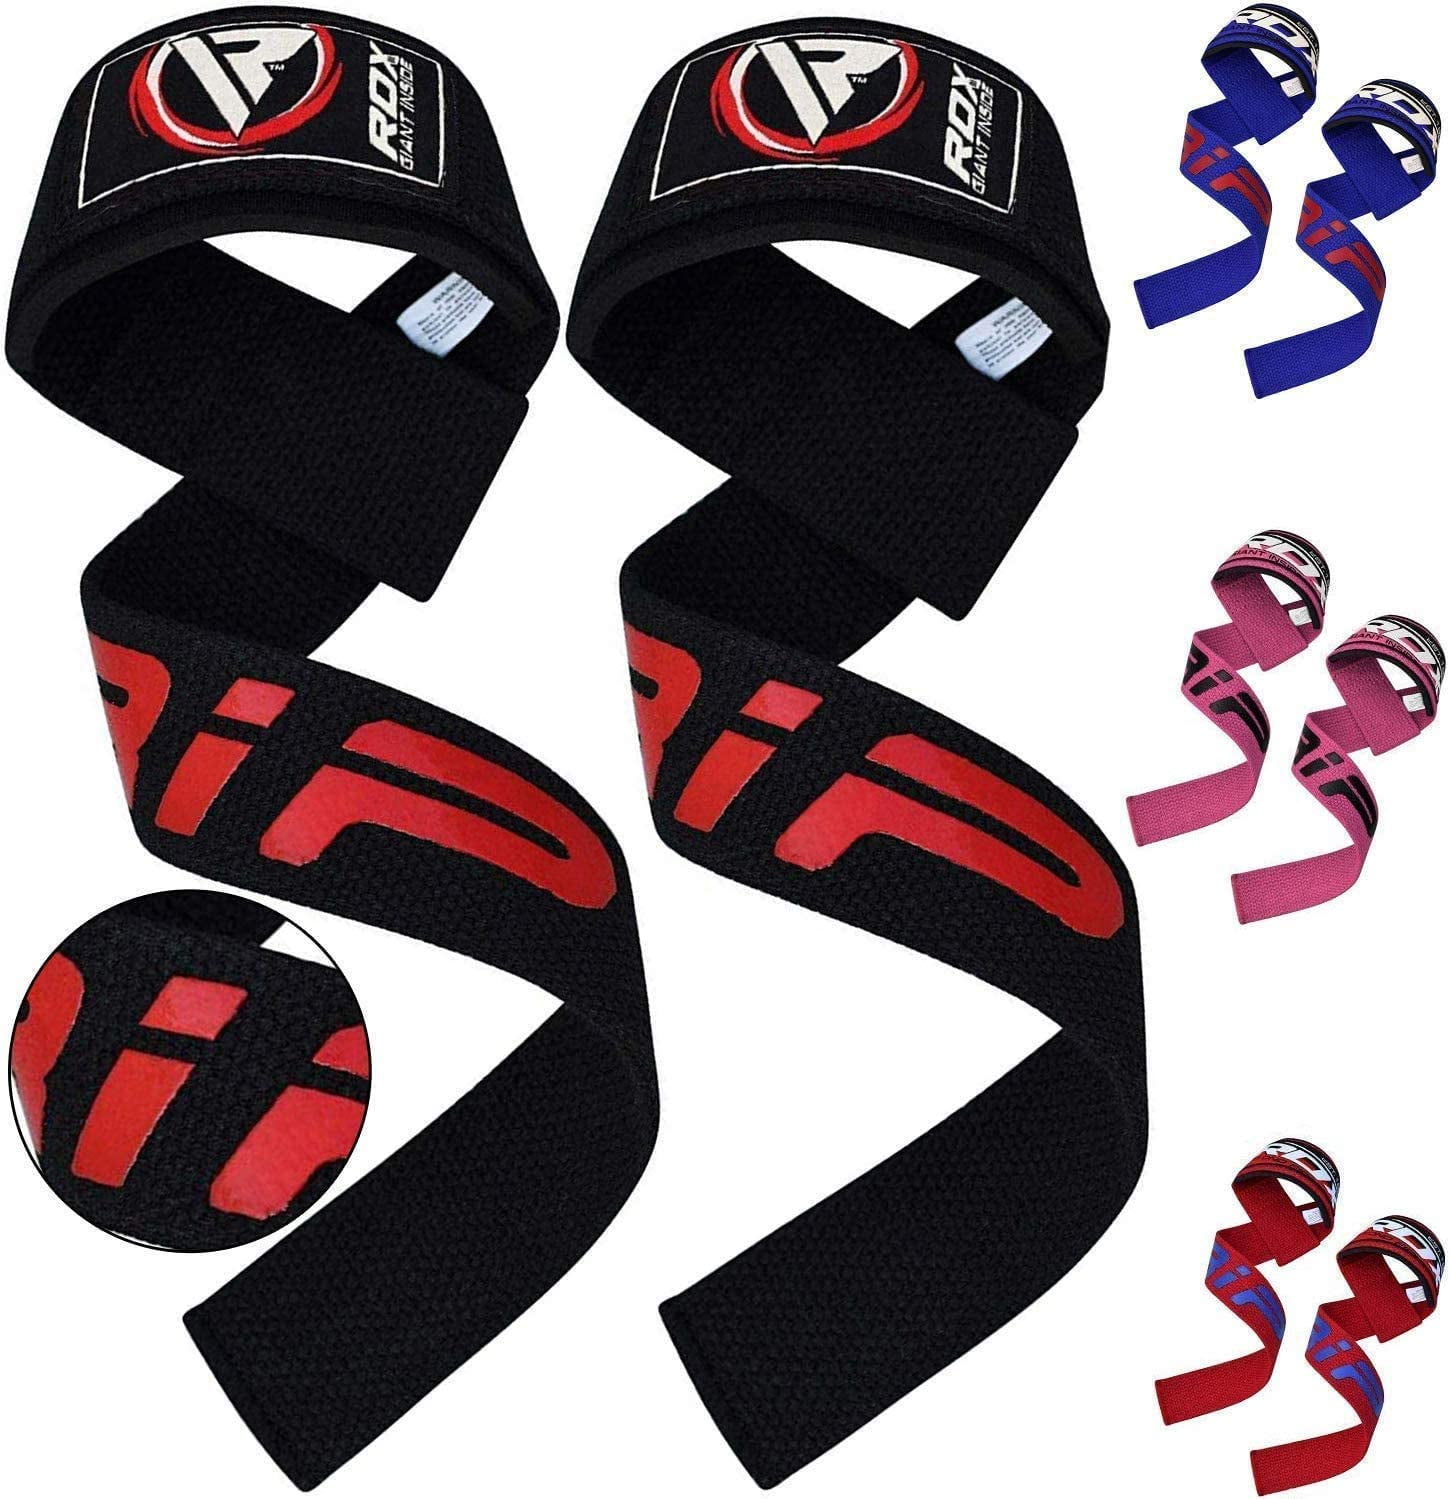 US Padded Weight Lifting Training Wrap Gym Straps Hand Bar Wrist Support Gloves